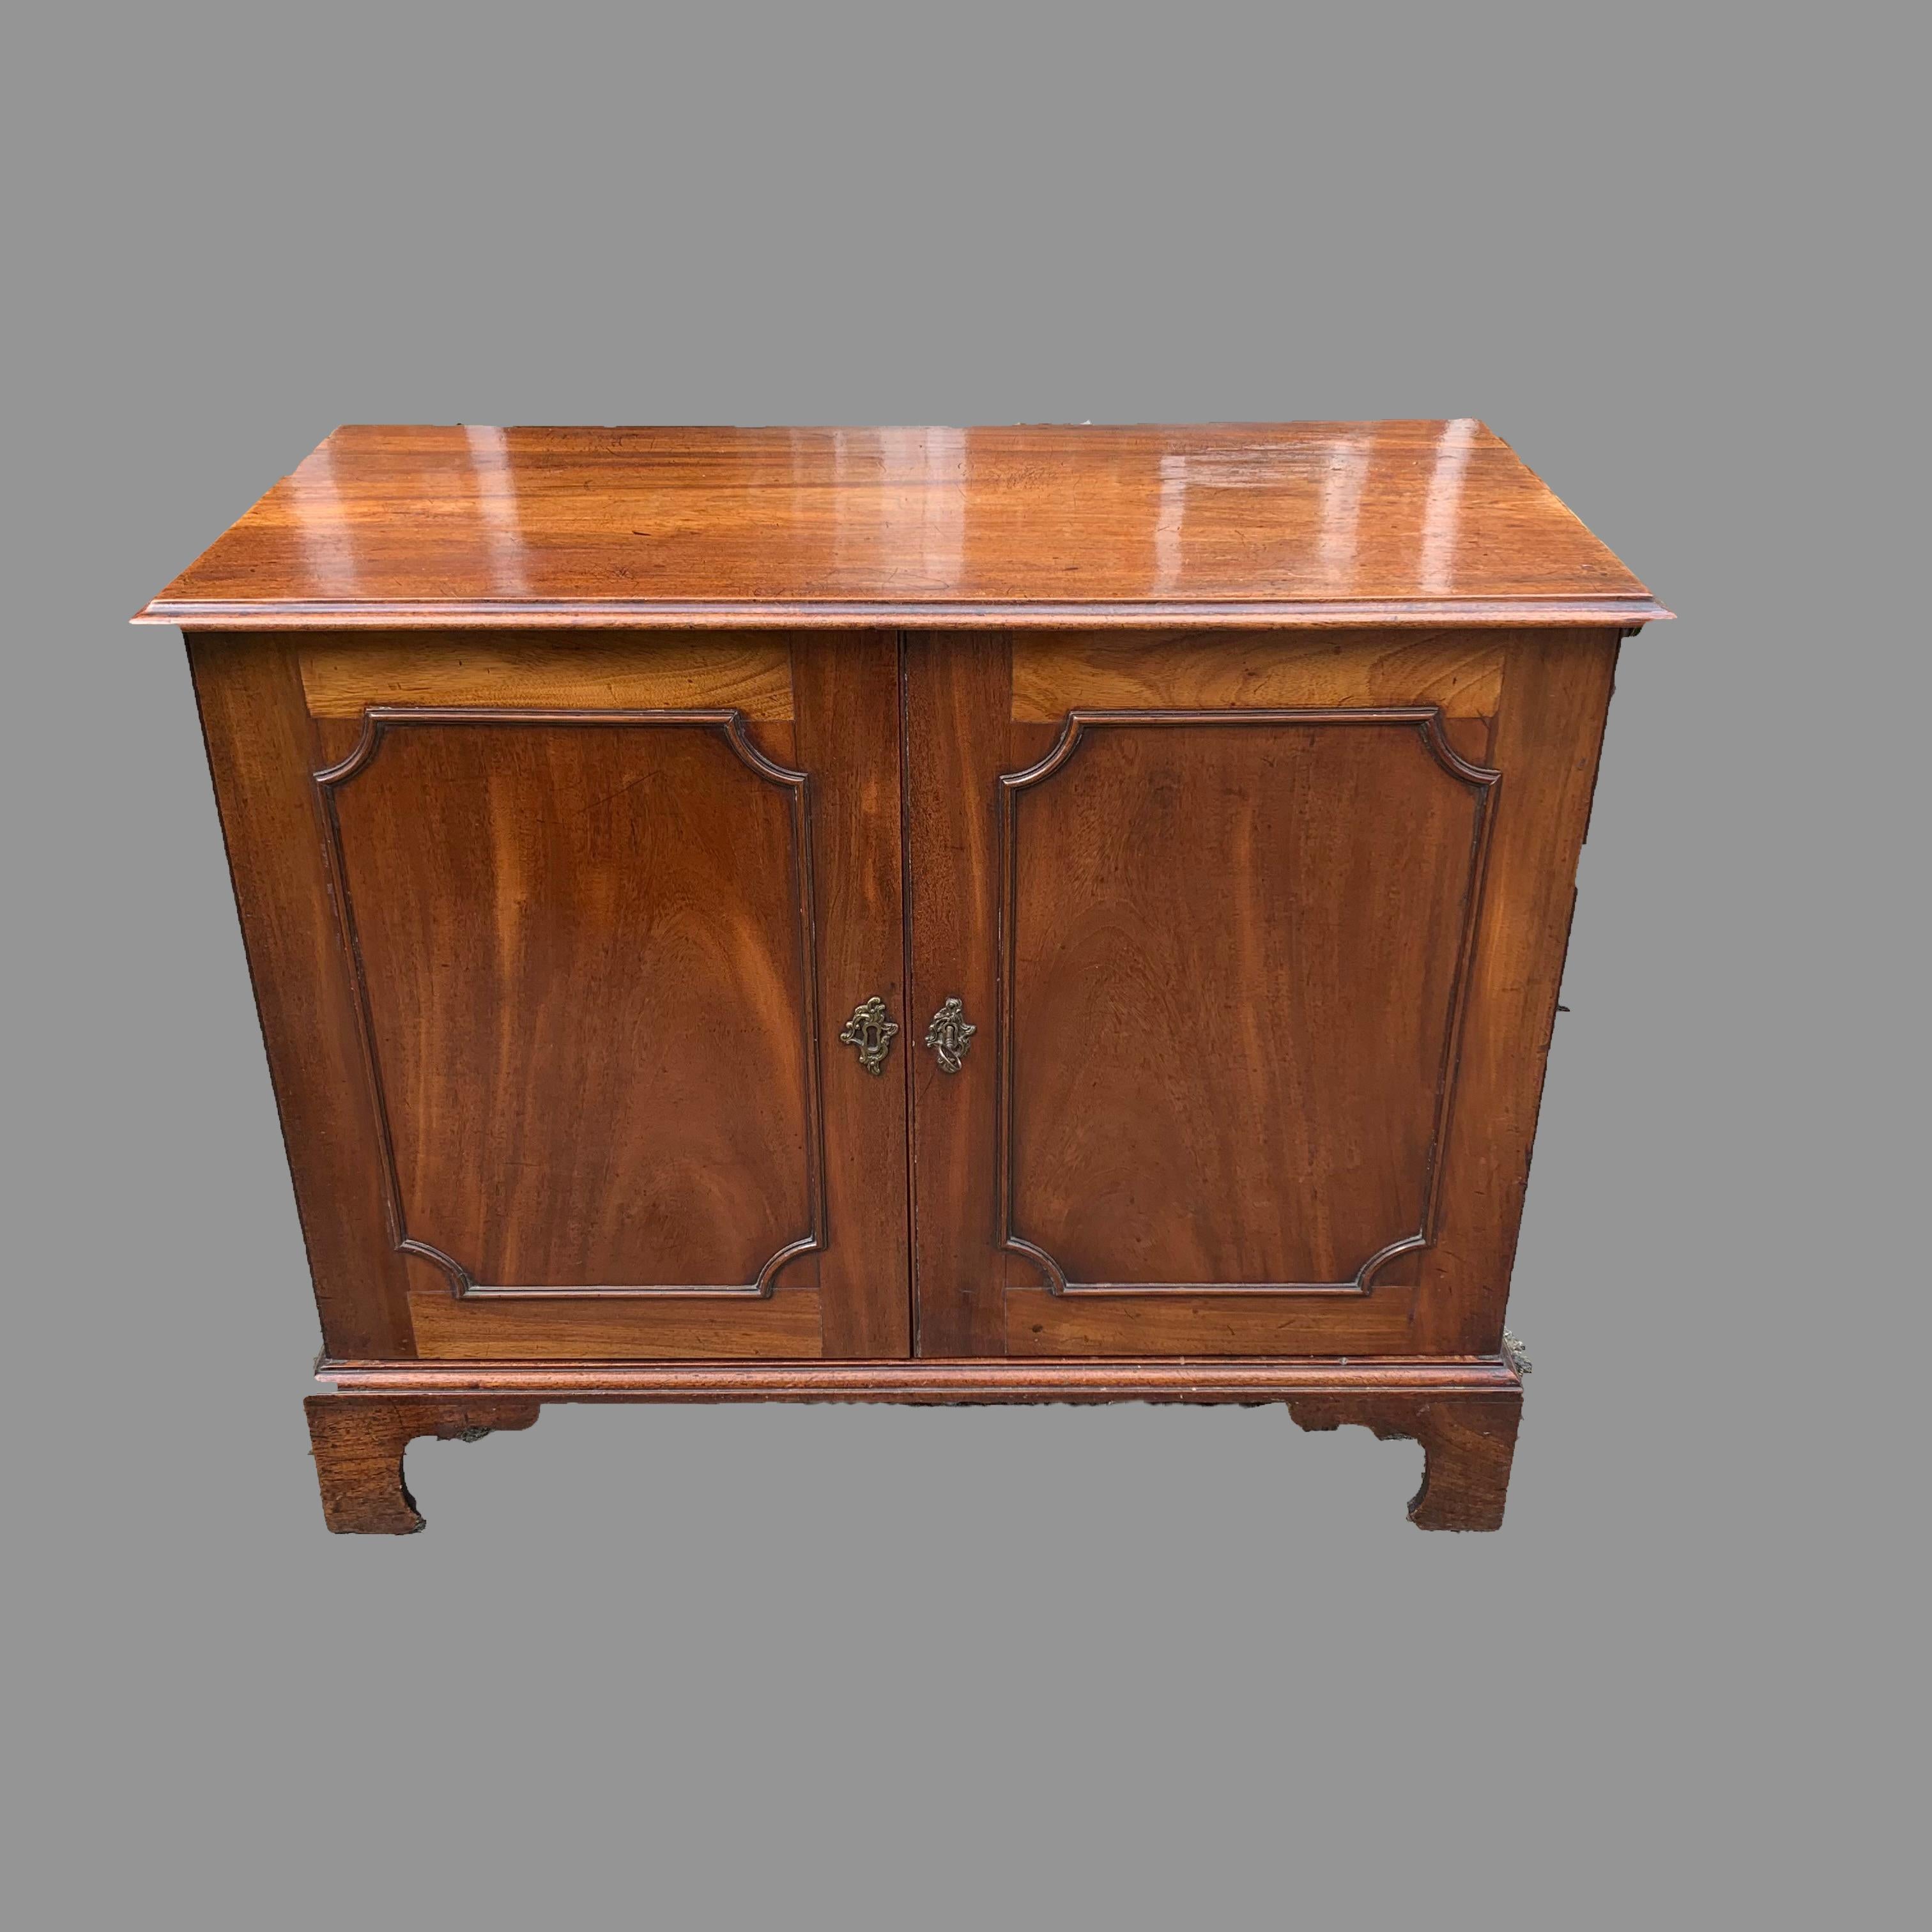 An unusual early 19th century mahogany two door side cabinet. The moulded edge top above a pair of panelled doors with moulded concave-cornered surrounds, enclosing the interior with one sliding tray, space for a second sliding tray and two